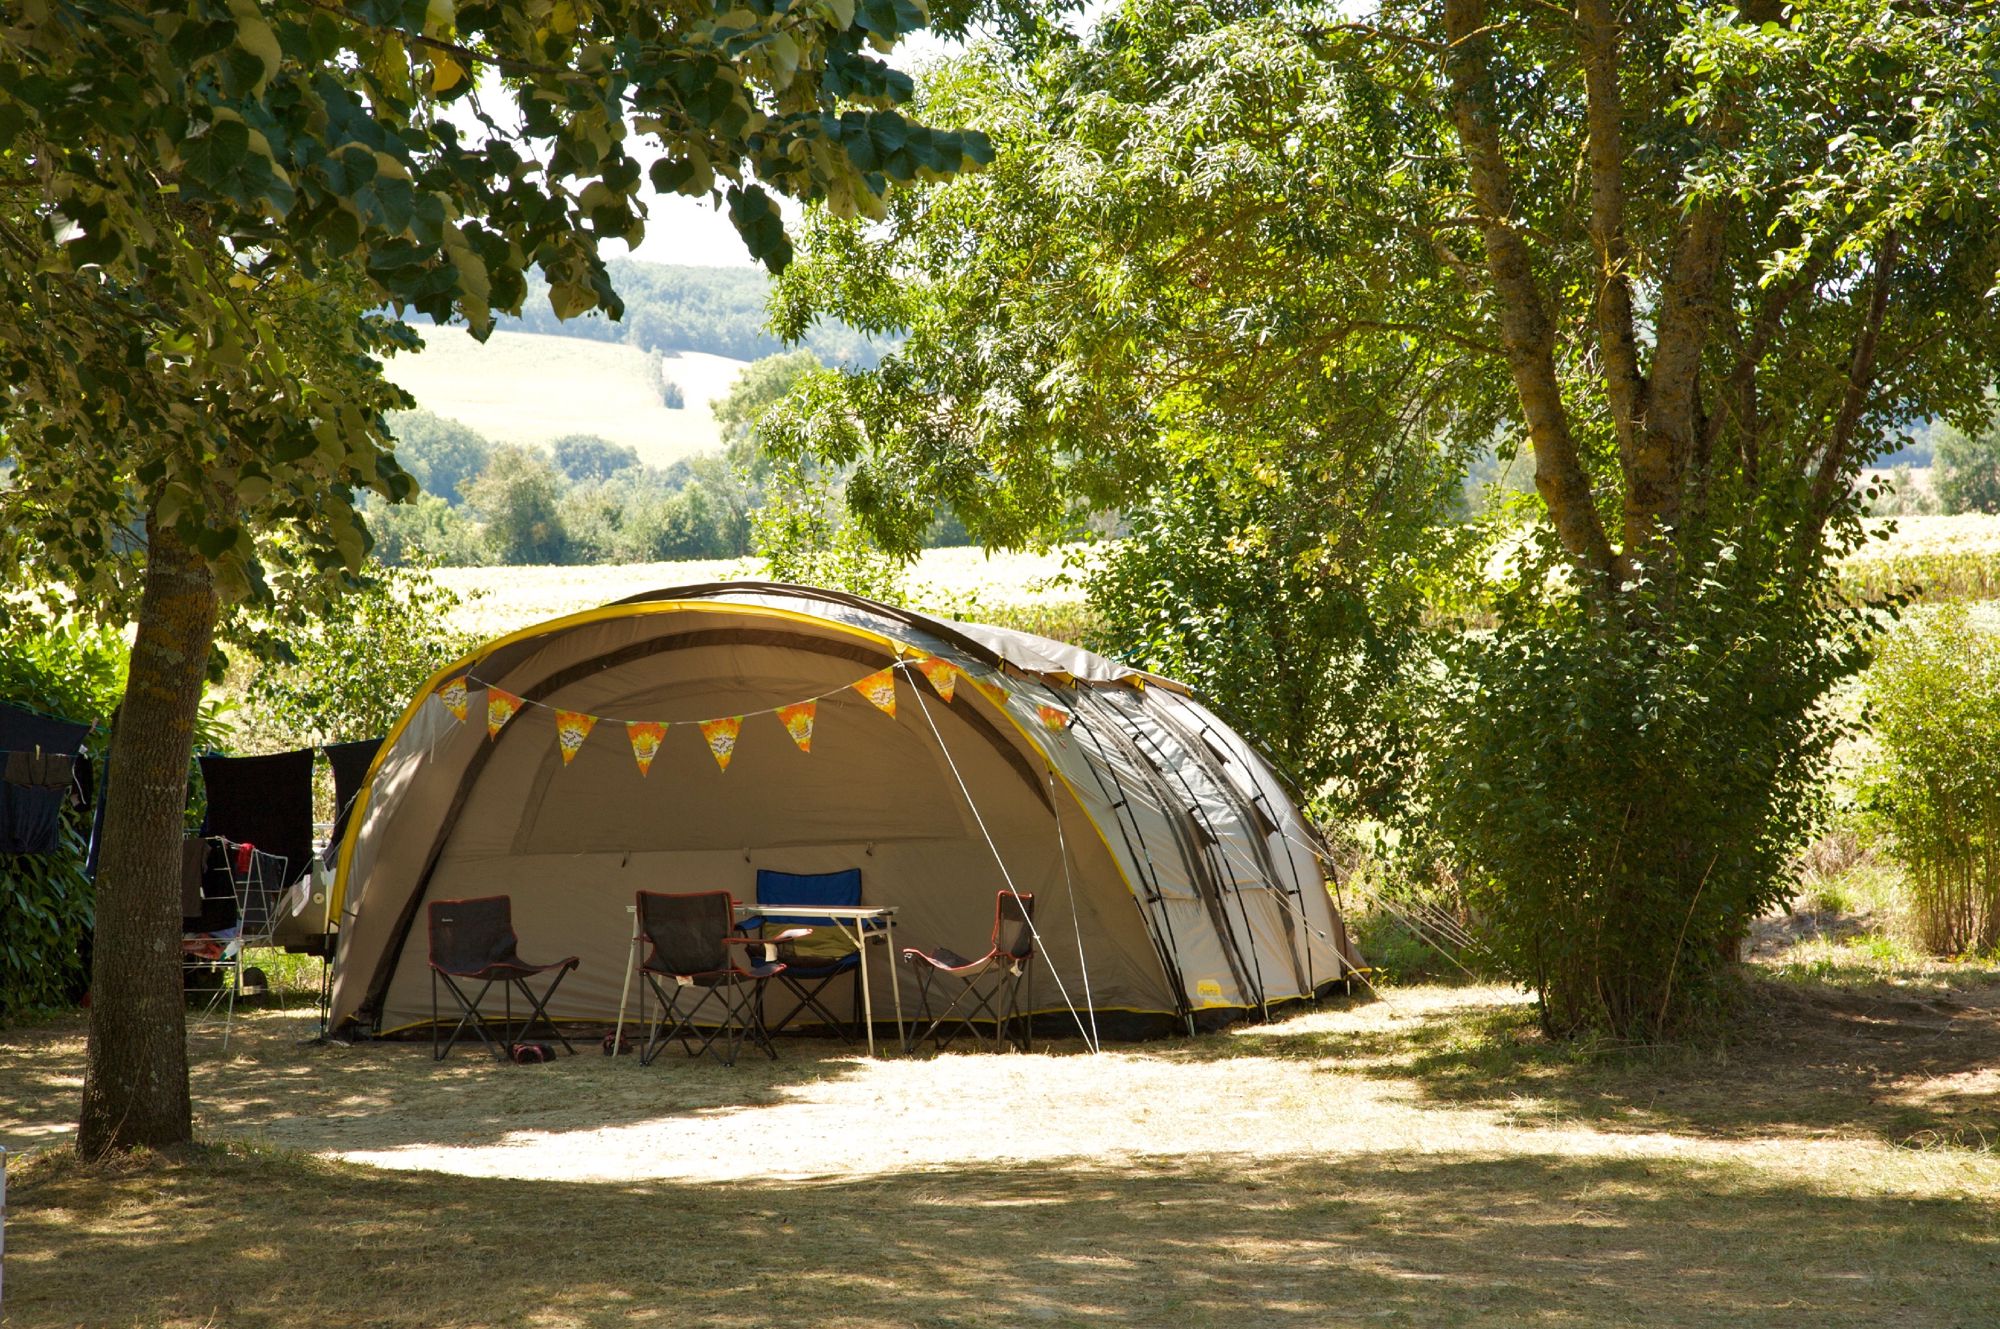 Campsites in South West France – The best camping locations in the south-west of France